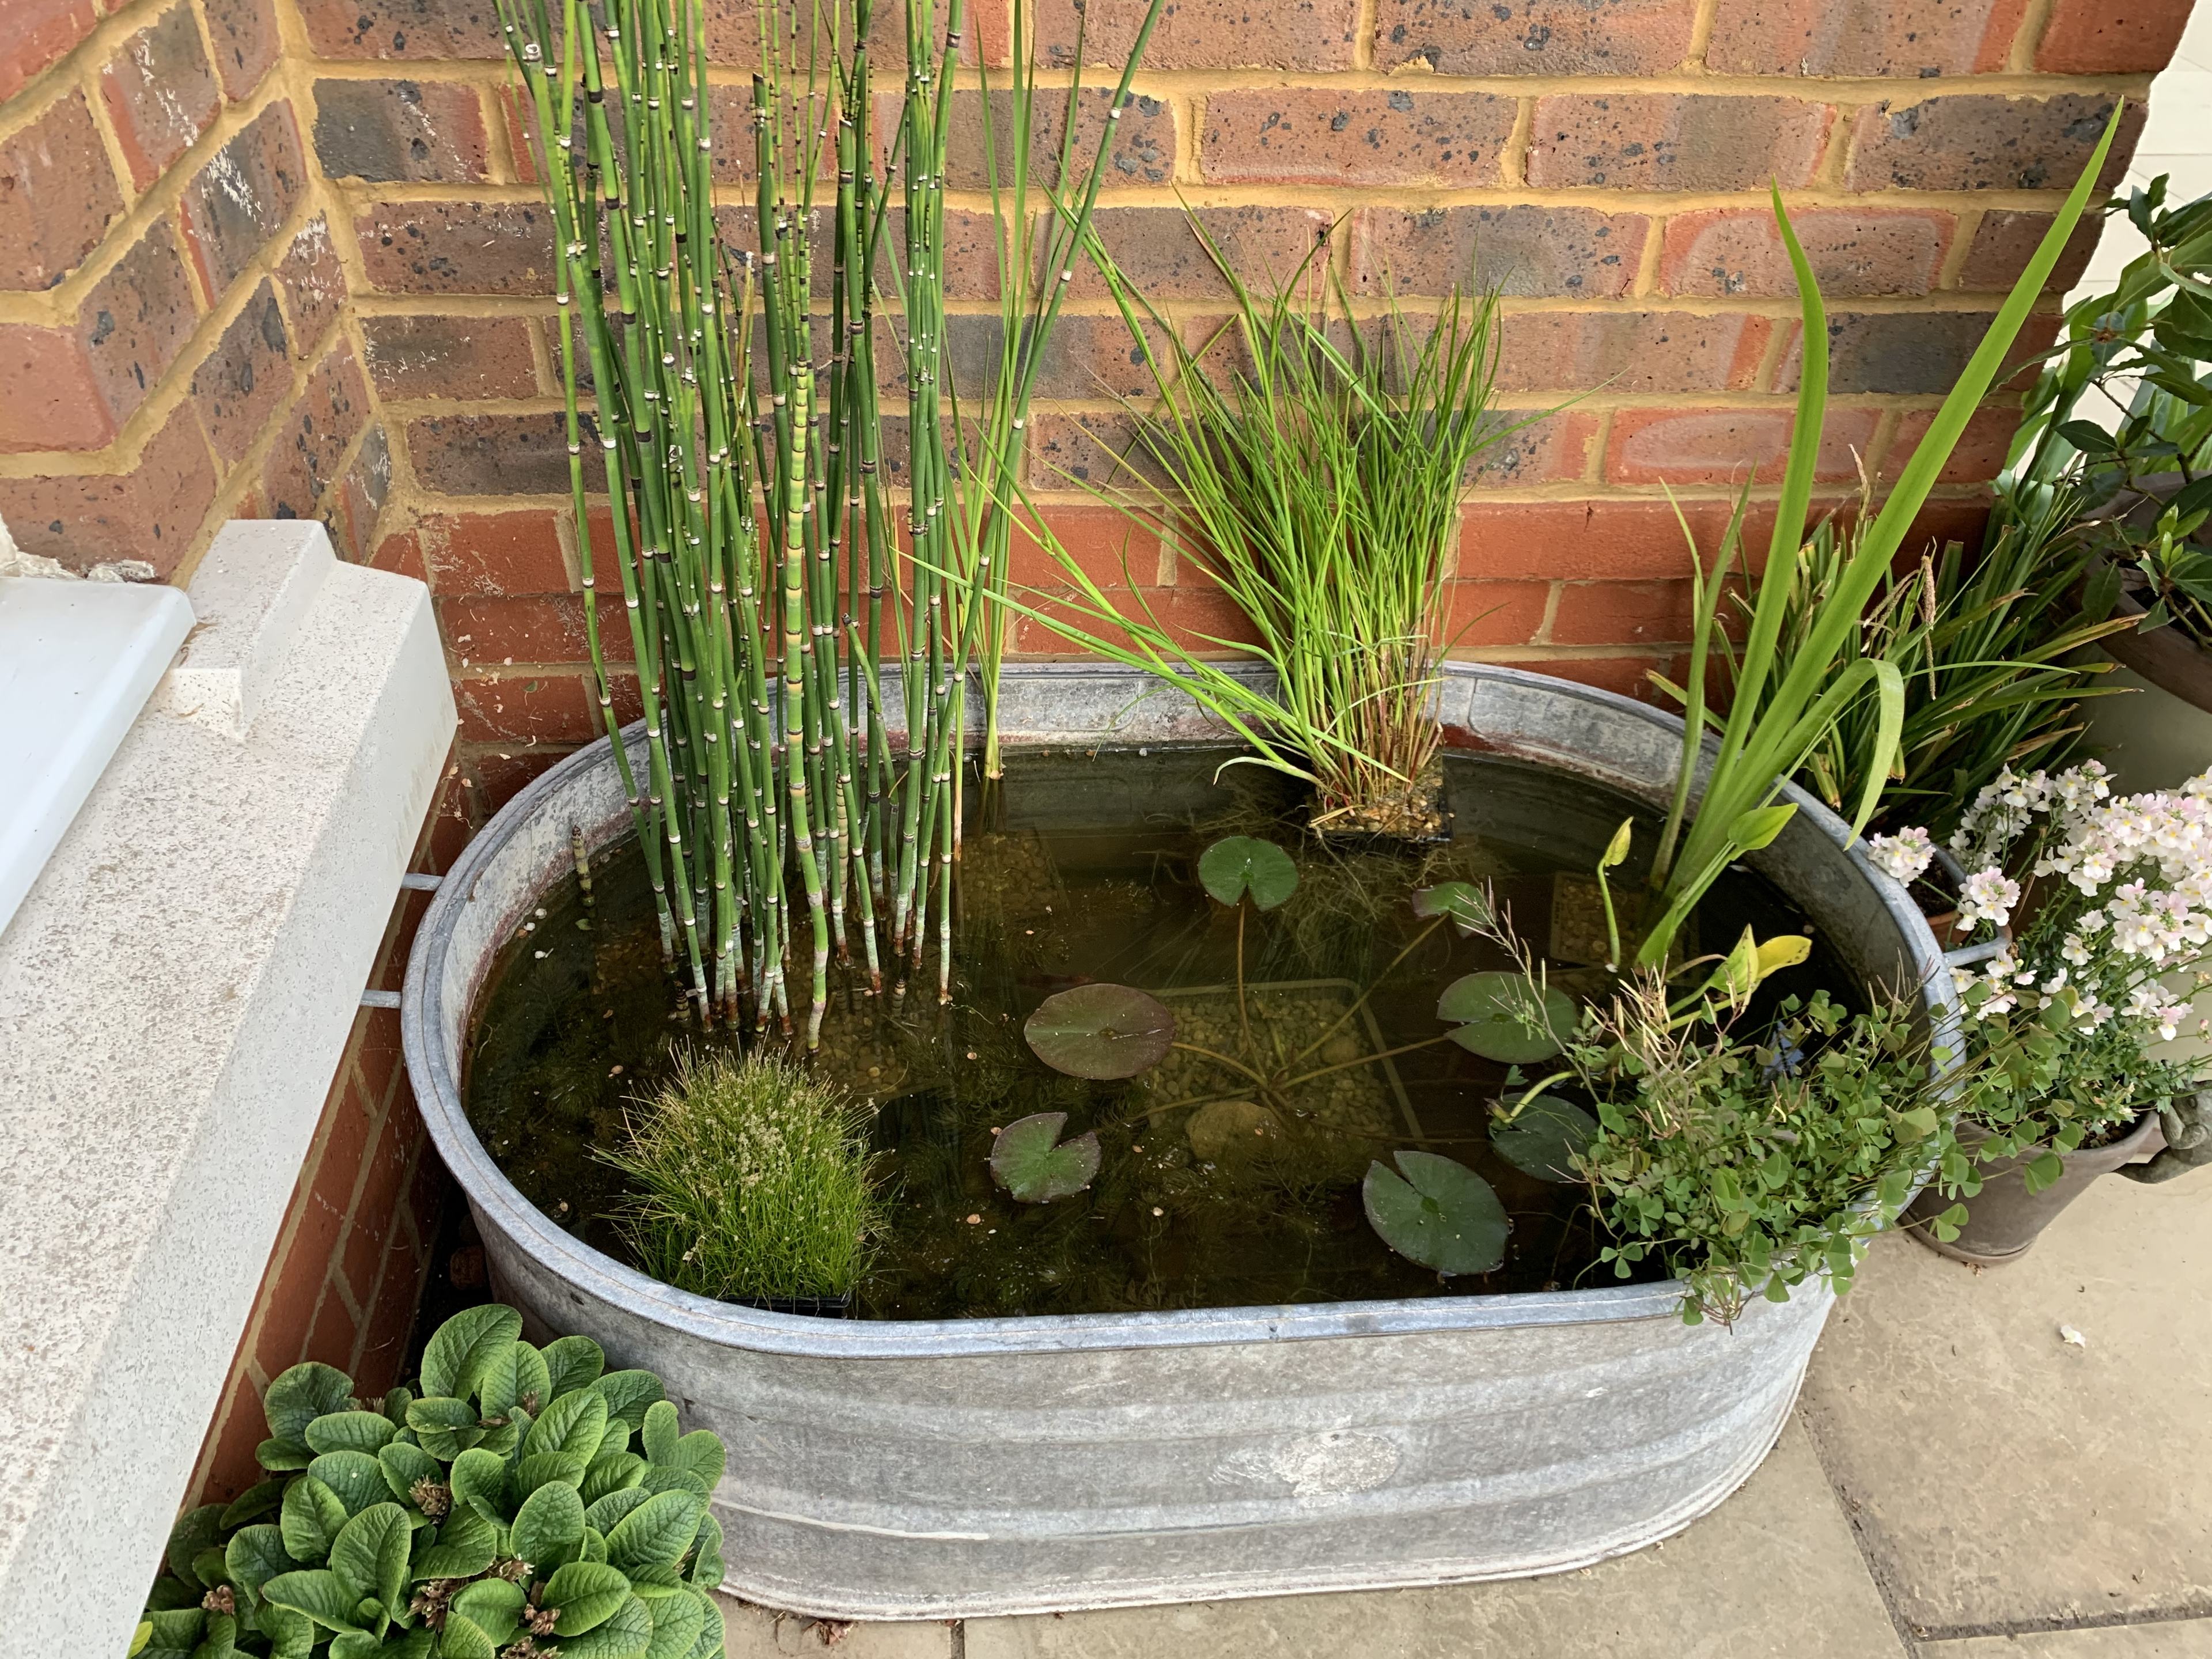 Show your Ponds - Page 2 - Homes, Gardens and DIY - PistonHeads